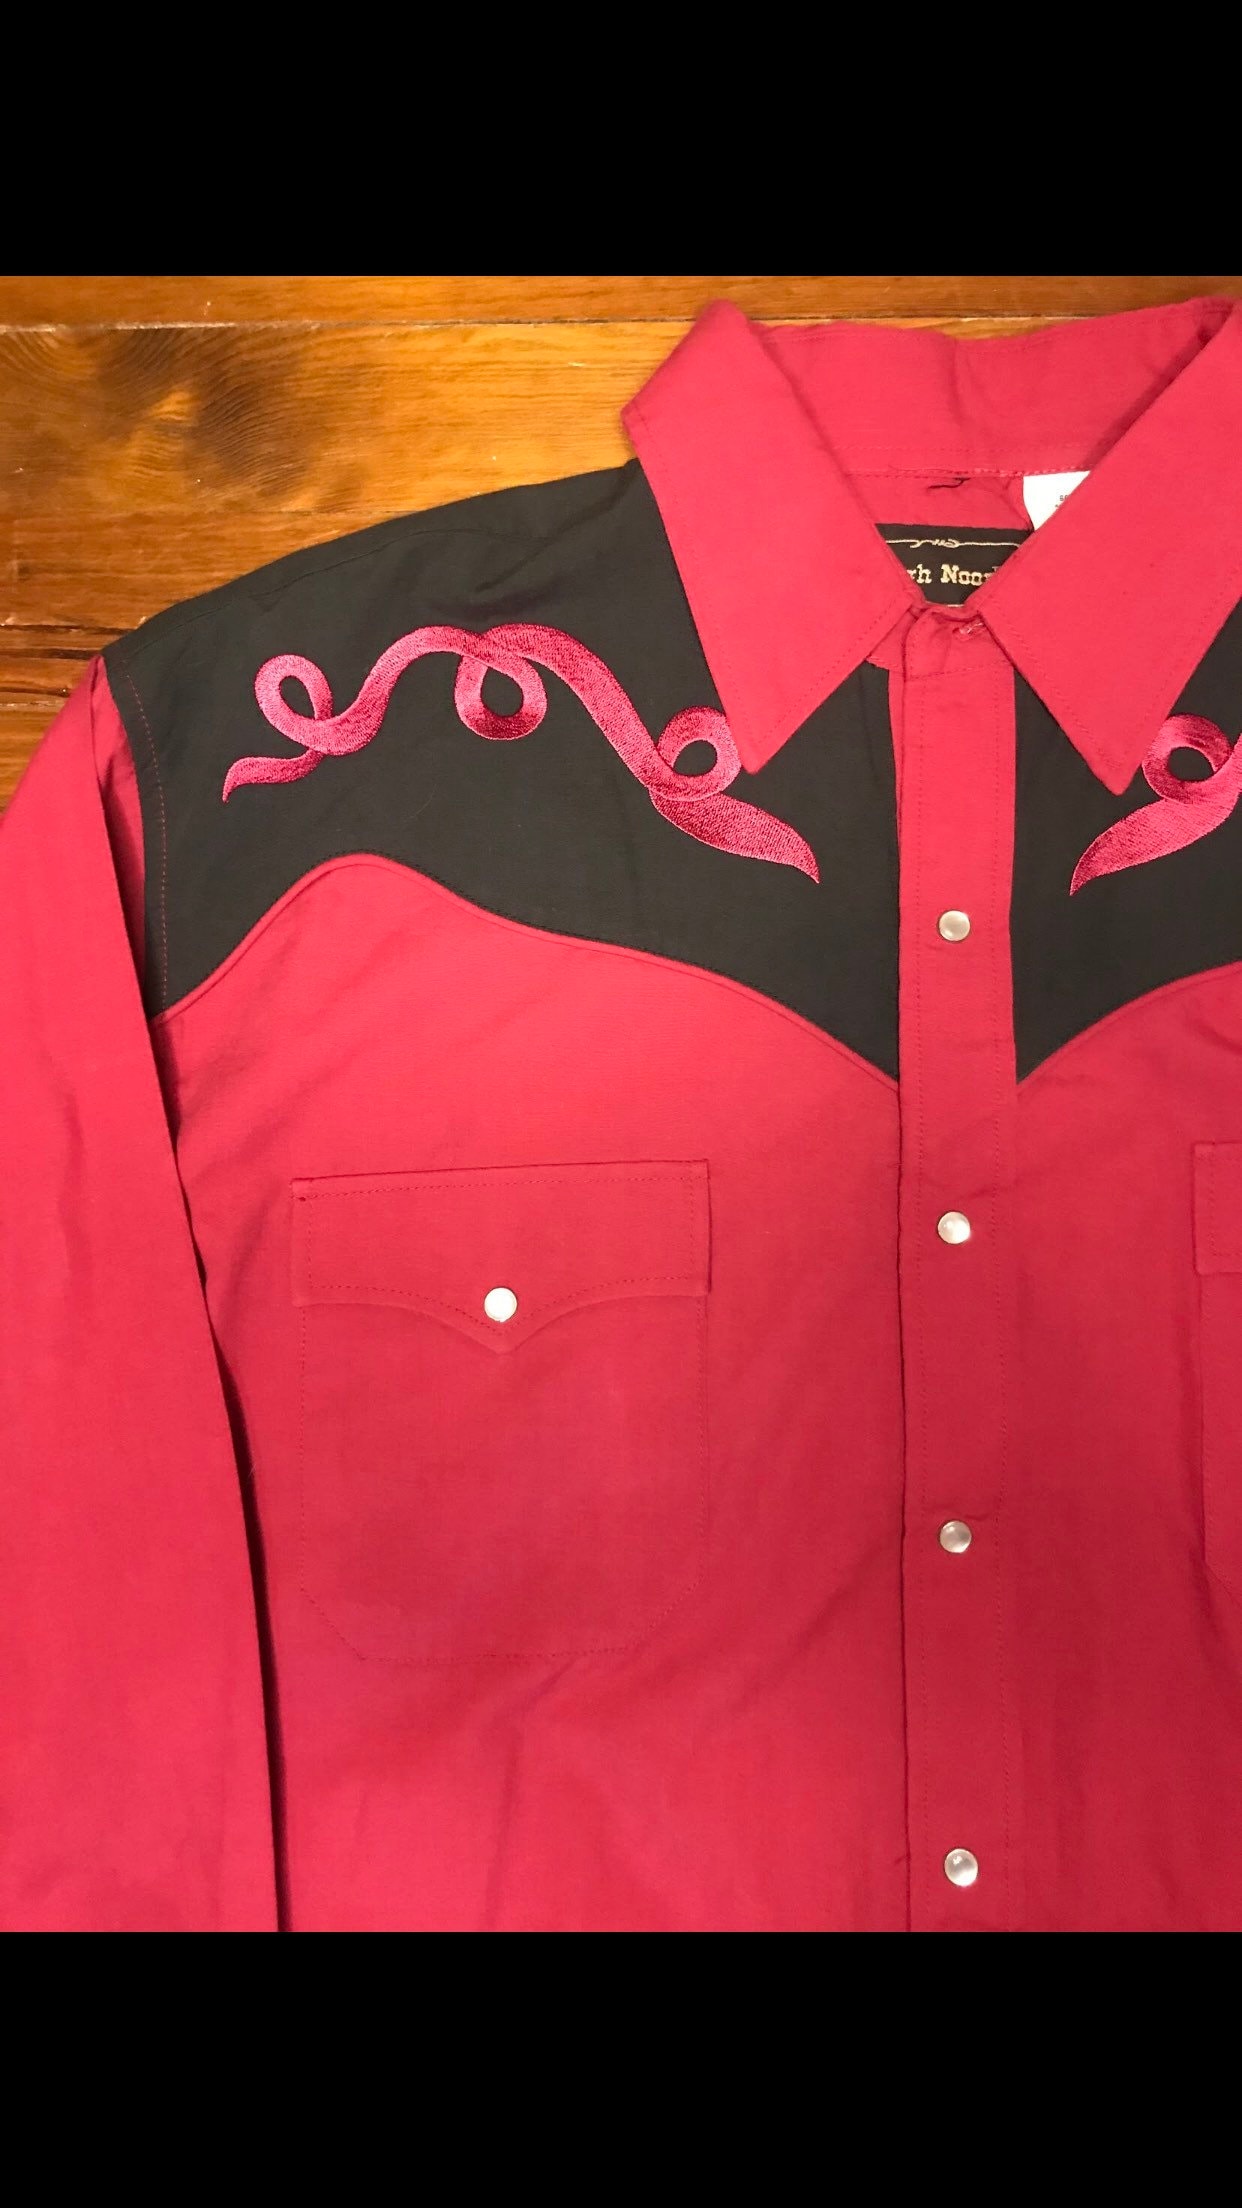 Vintage Black and Maroon Western shirt with pearl snapped | Etsy